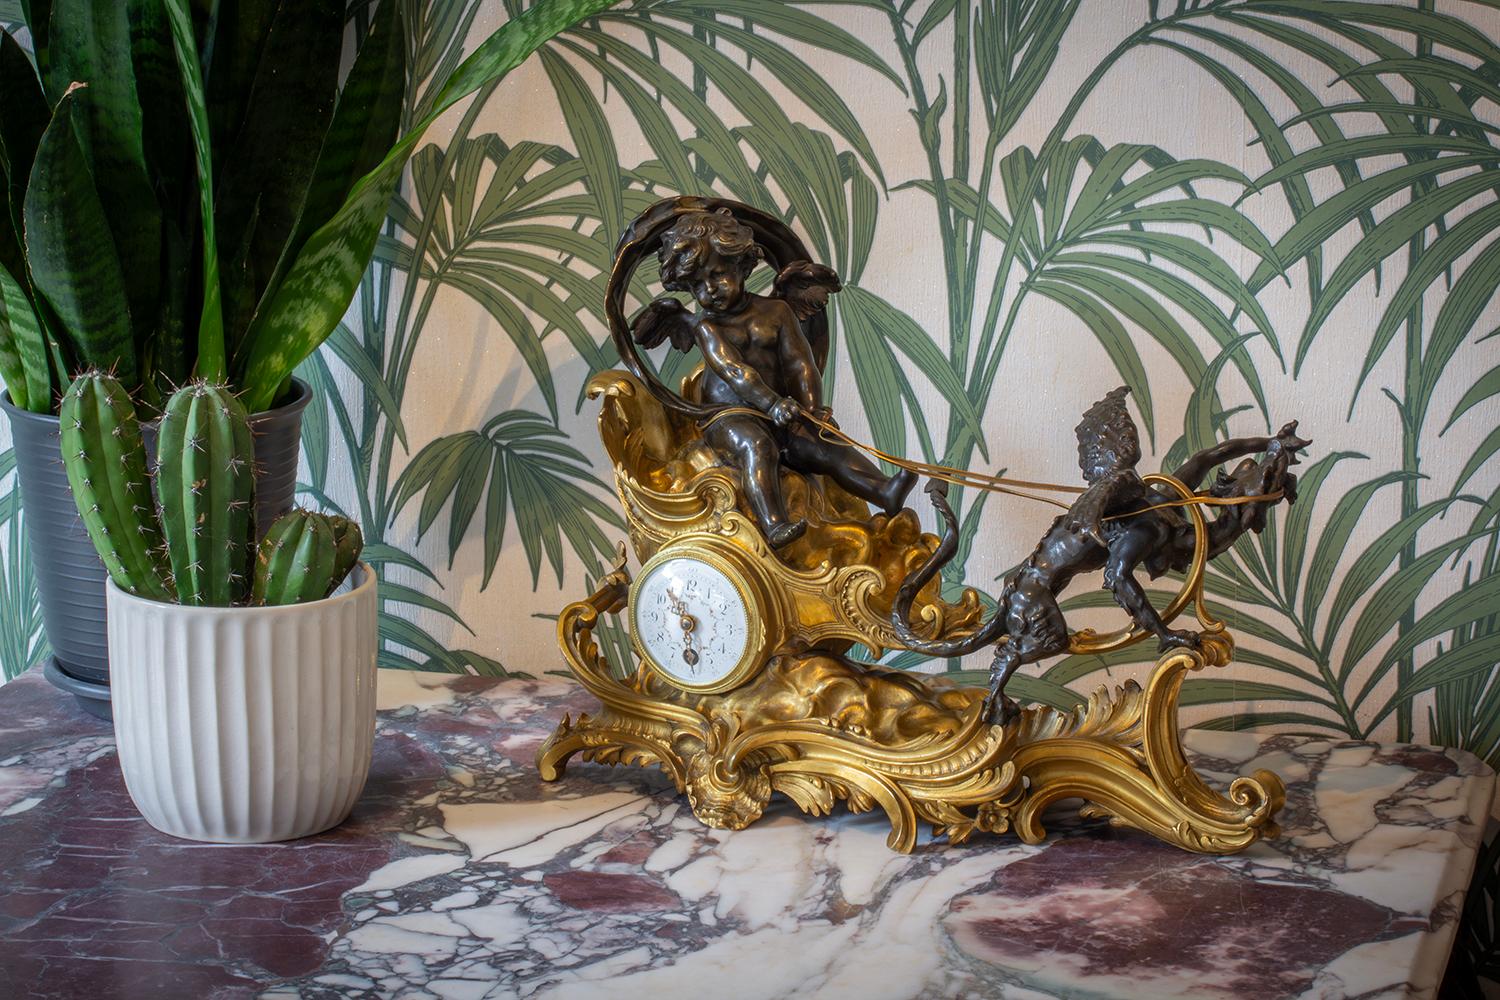 Dragon Drawn Chariot

From our Clock collection, we are thrilled to introduce this French Mantle Clock attributed to Francois Linke. The Clock in the rococo style cast as a winged Cherub wearing a billowing robe riding in a gilt chariot being pulled